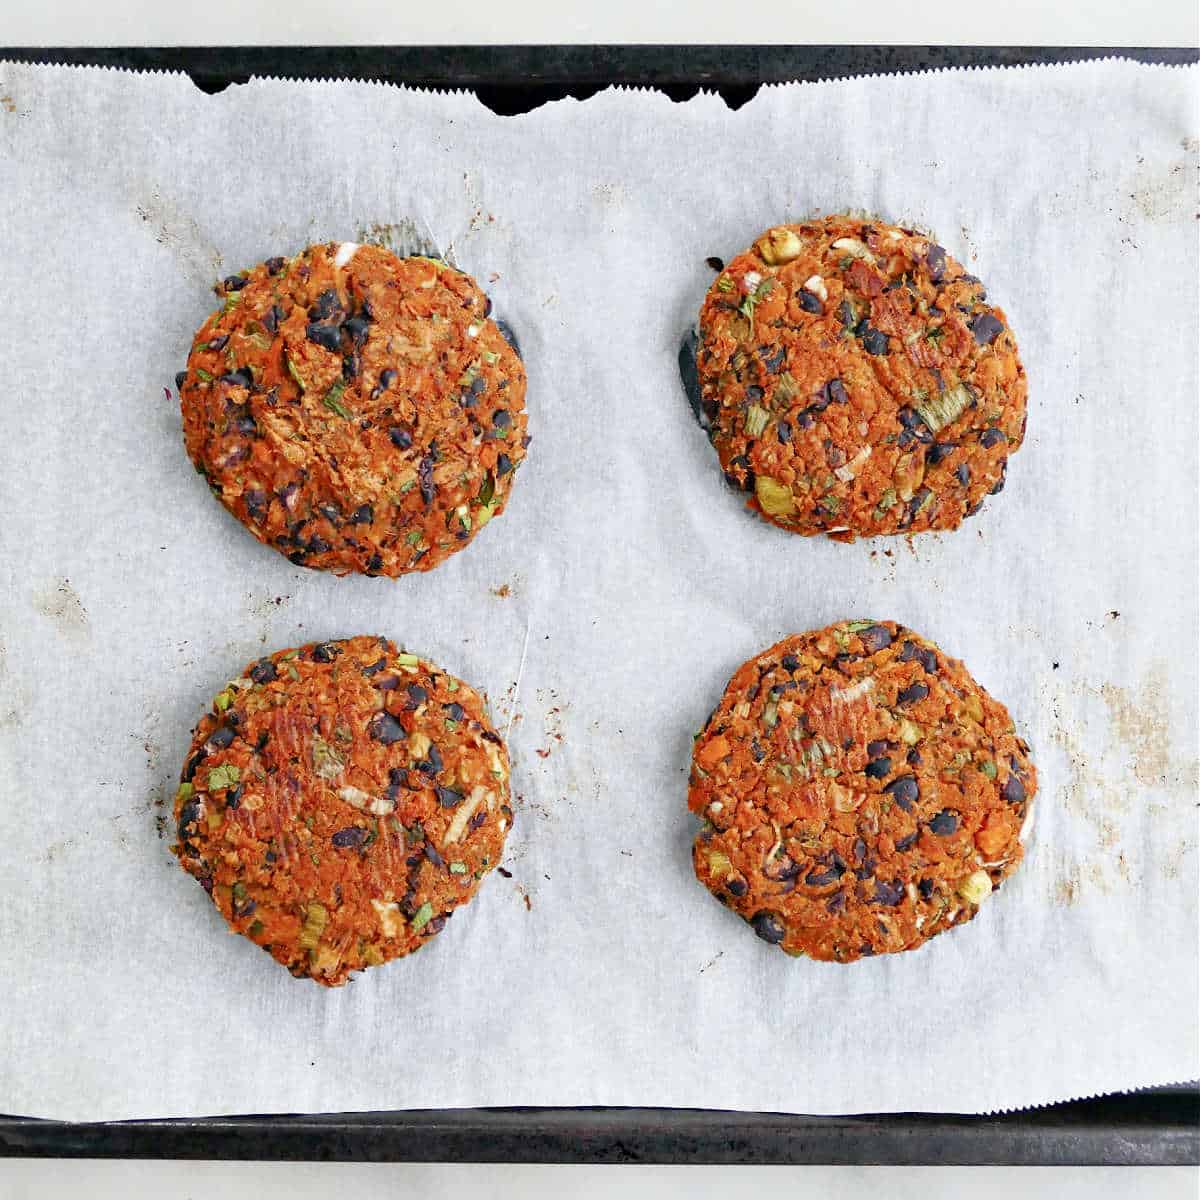 Four sweet potato black bean burgers on a parchment lined sheet pan after baking.